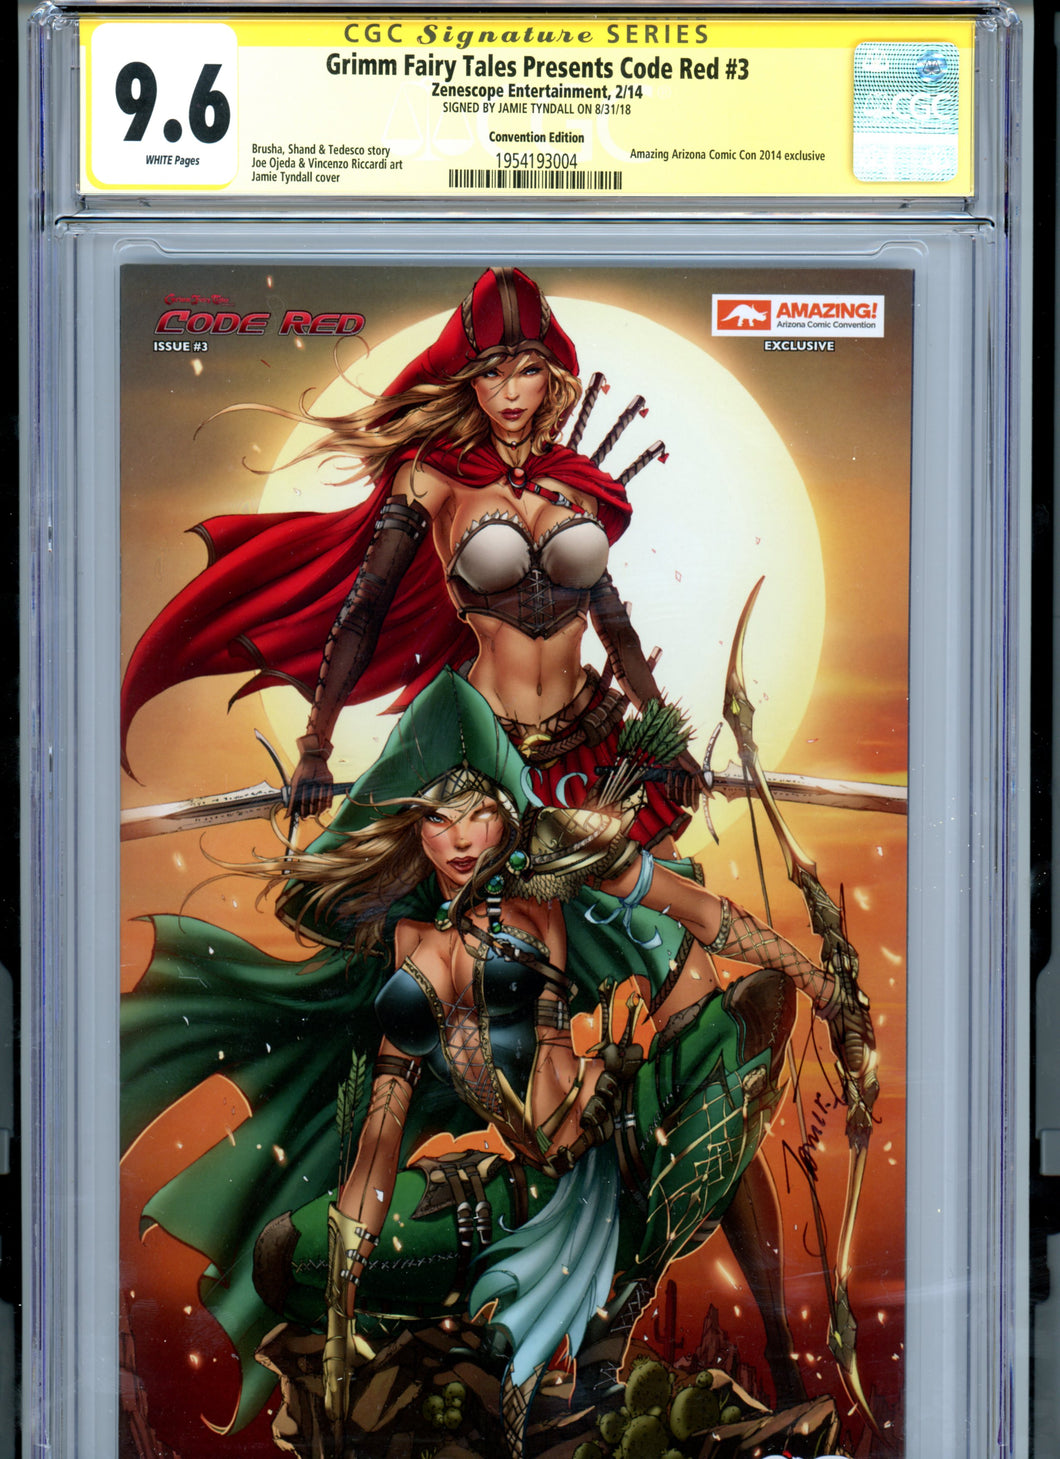 Grimm Fairy Tales Code Red #3 - Signed by Jamie Tyndall - CGC 9.6